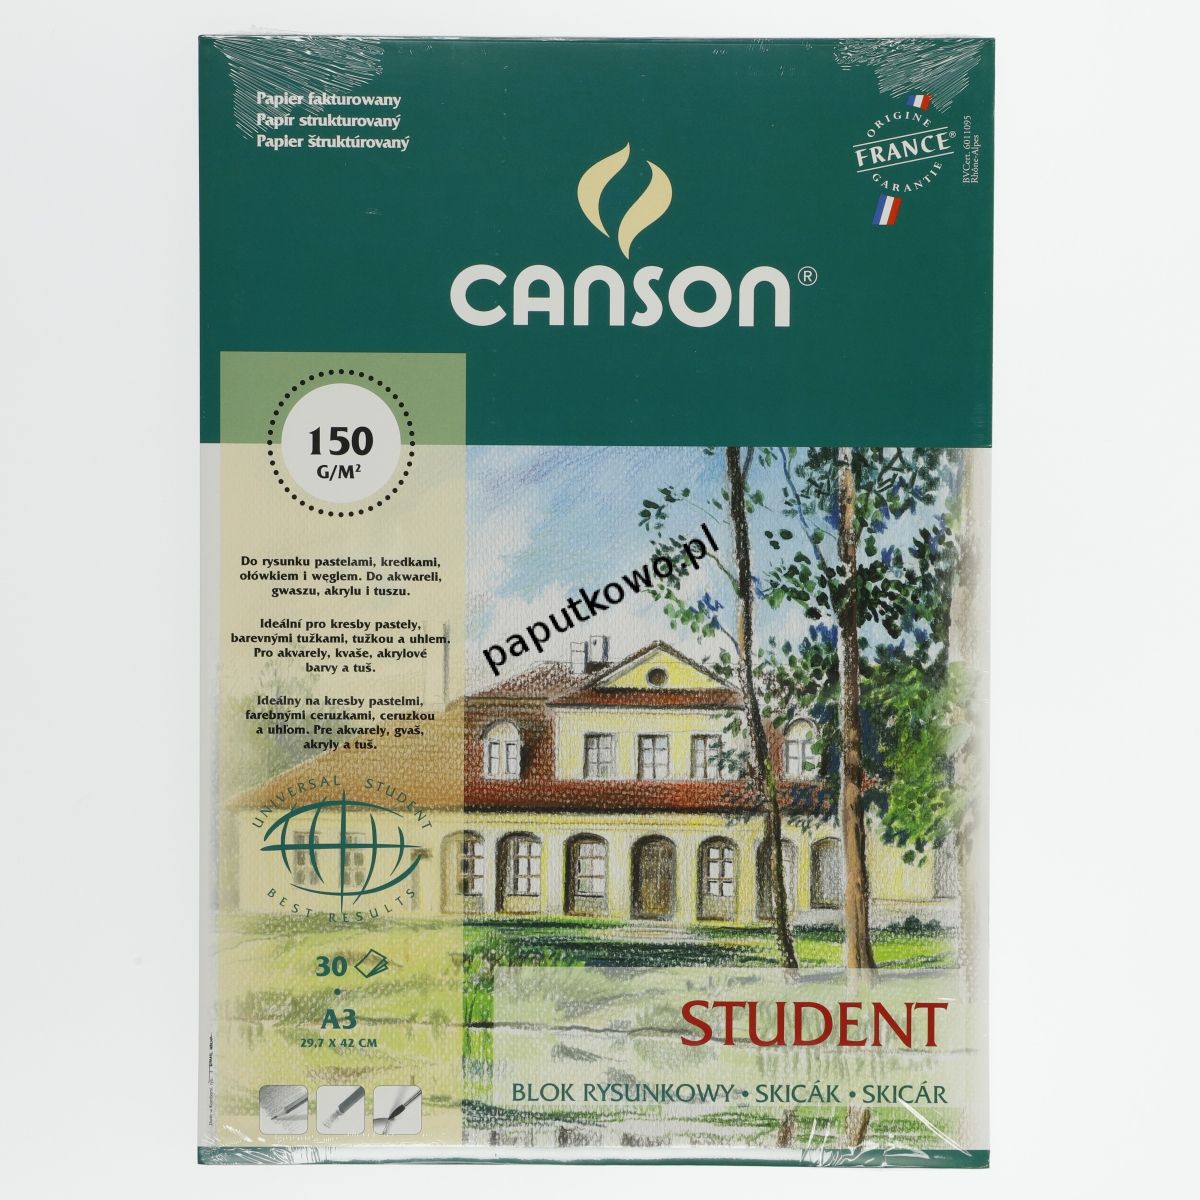 Blok rysunkowy Canson Student (400084730)